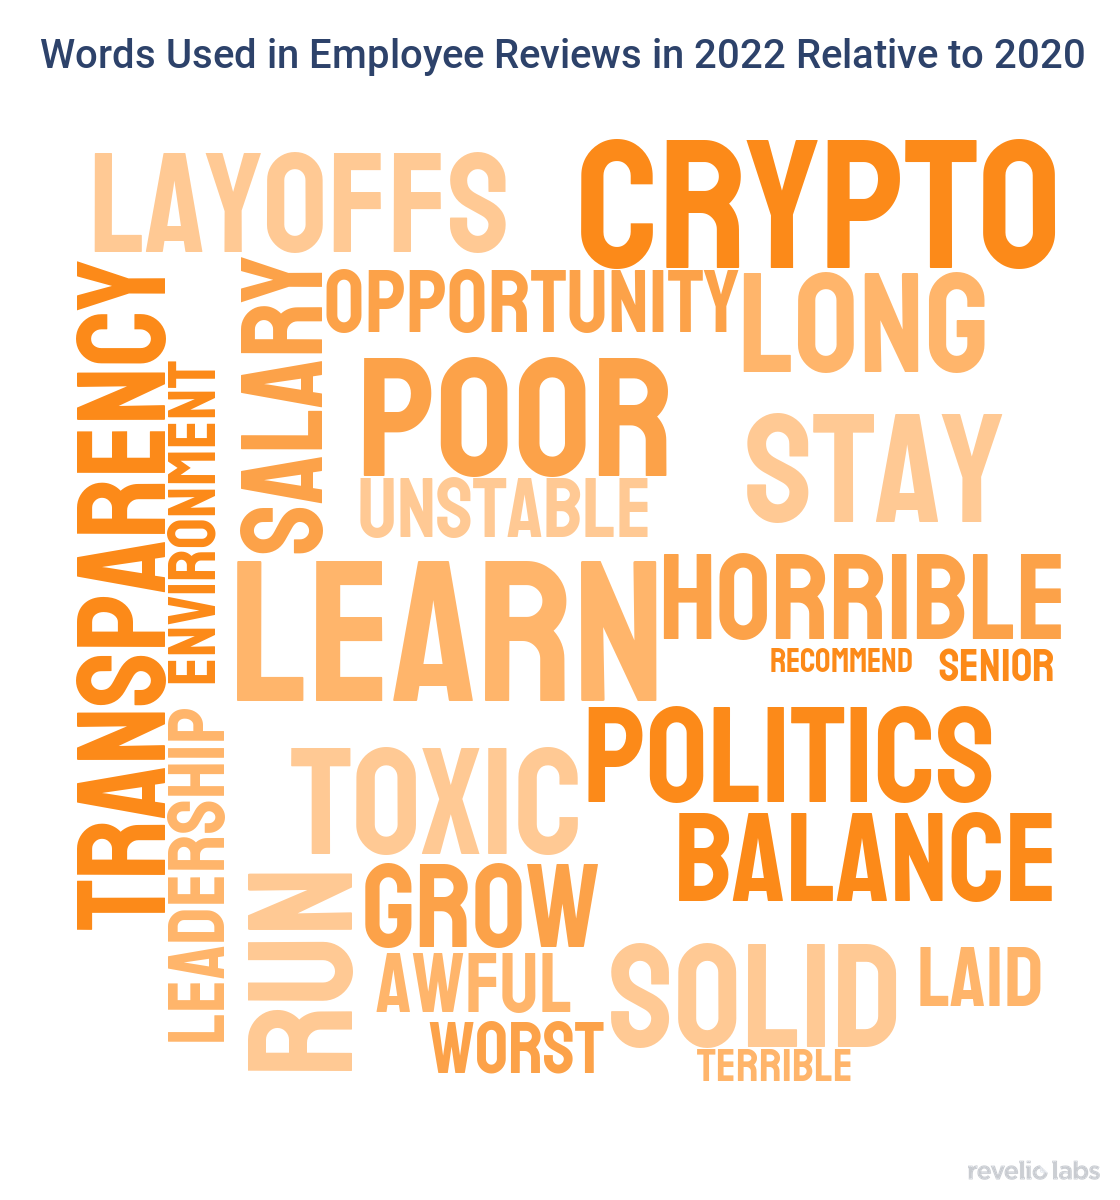 words-used-in-employee-reviews-in-2022-relative-to-2020